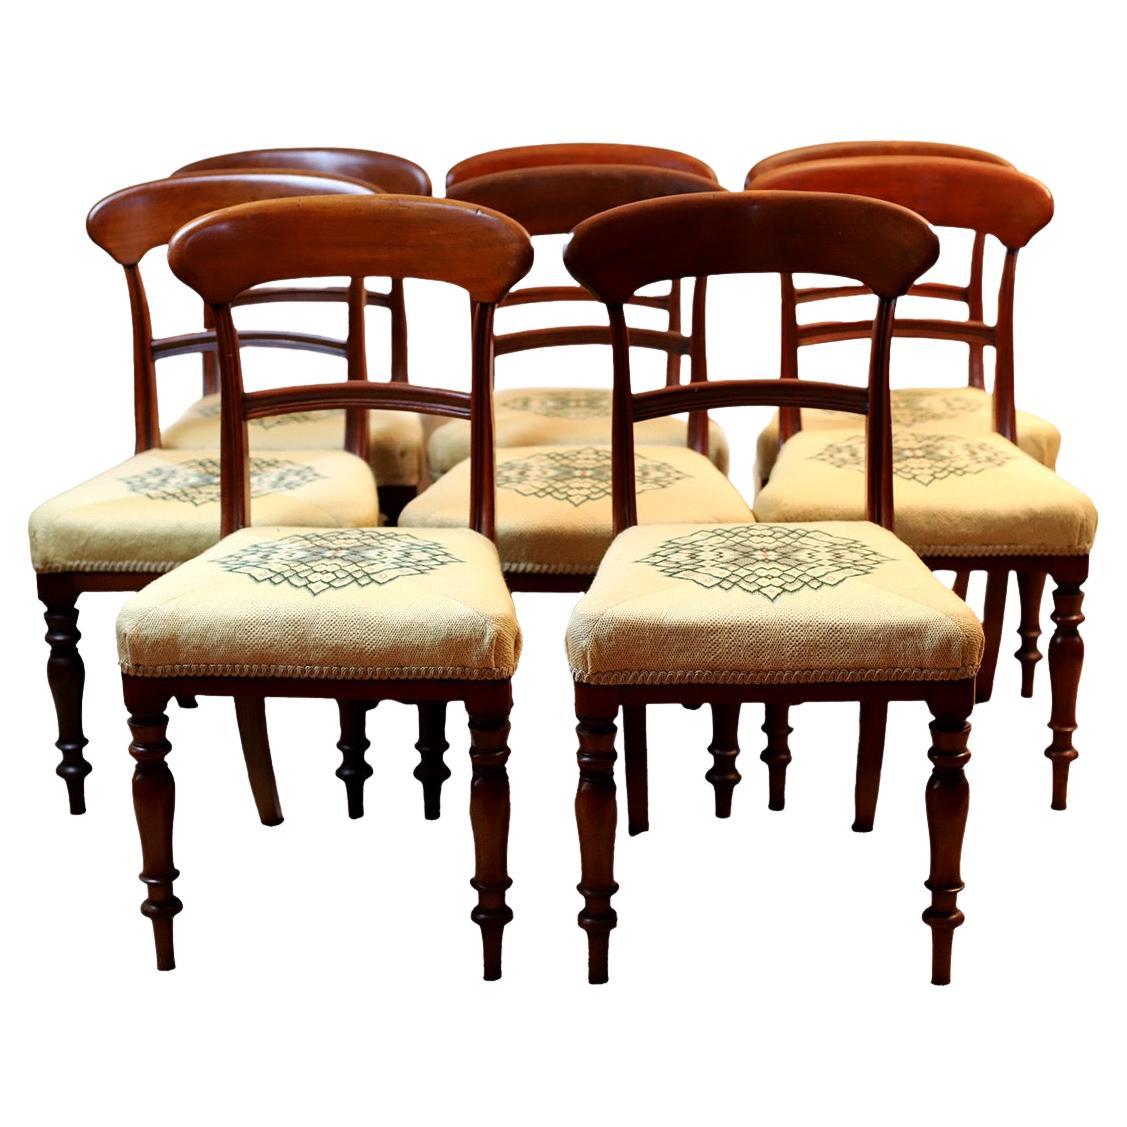 Beautiful Set of 8 Victorian Dining Chairs